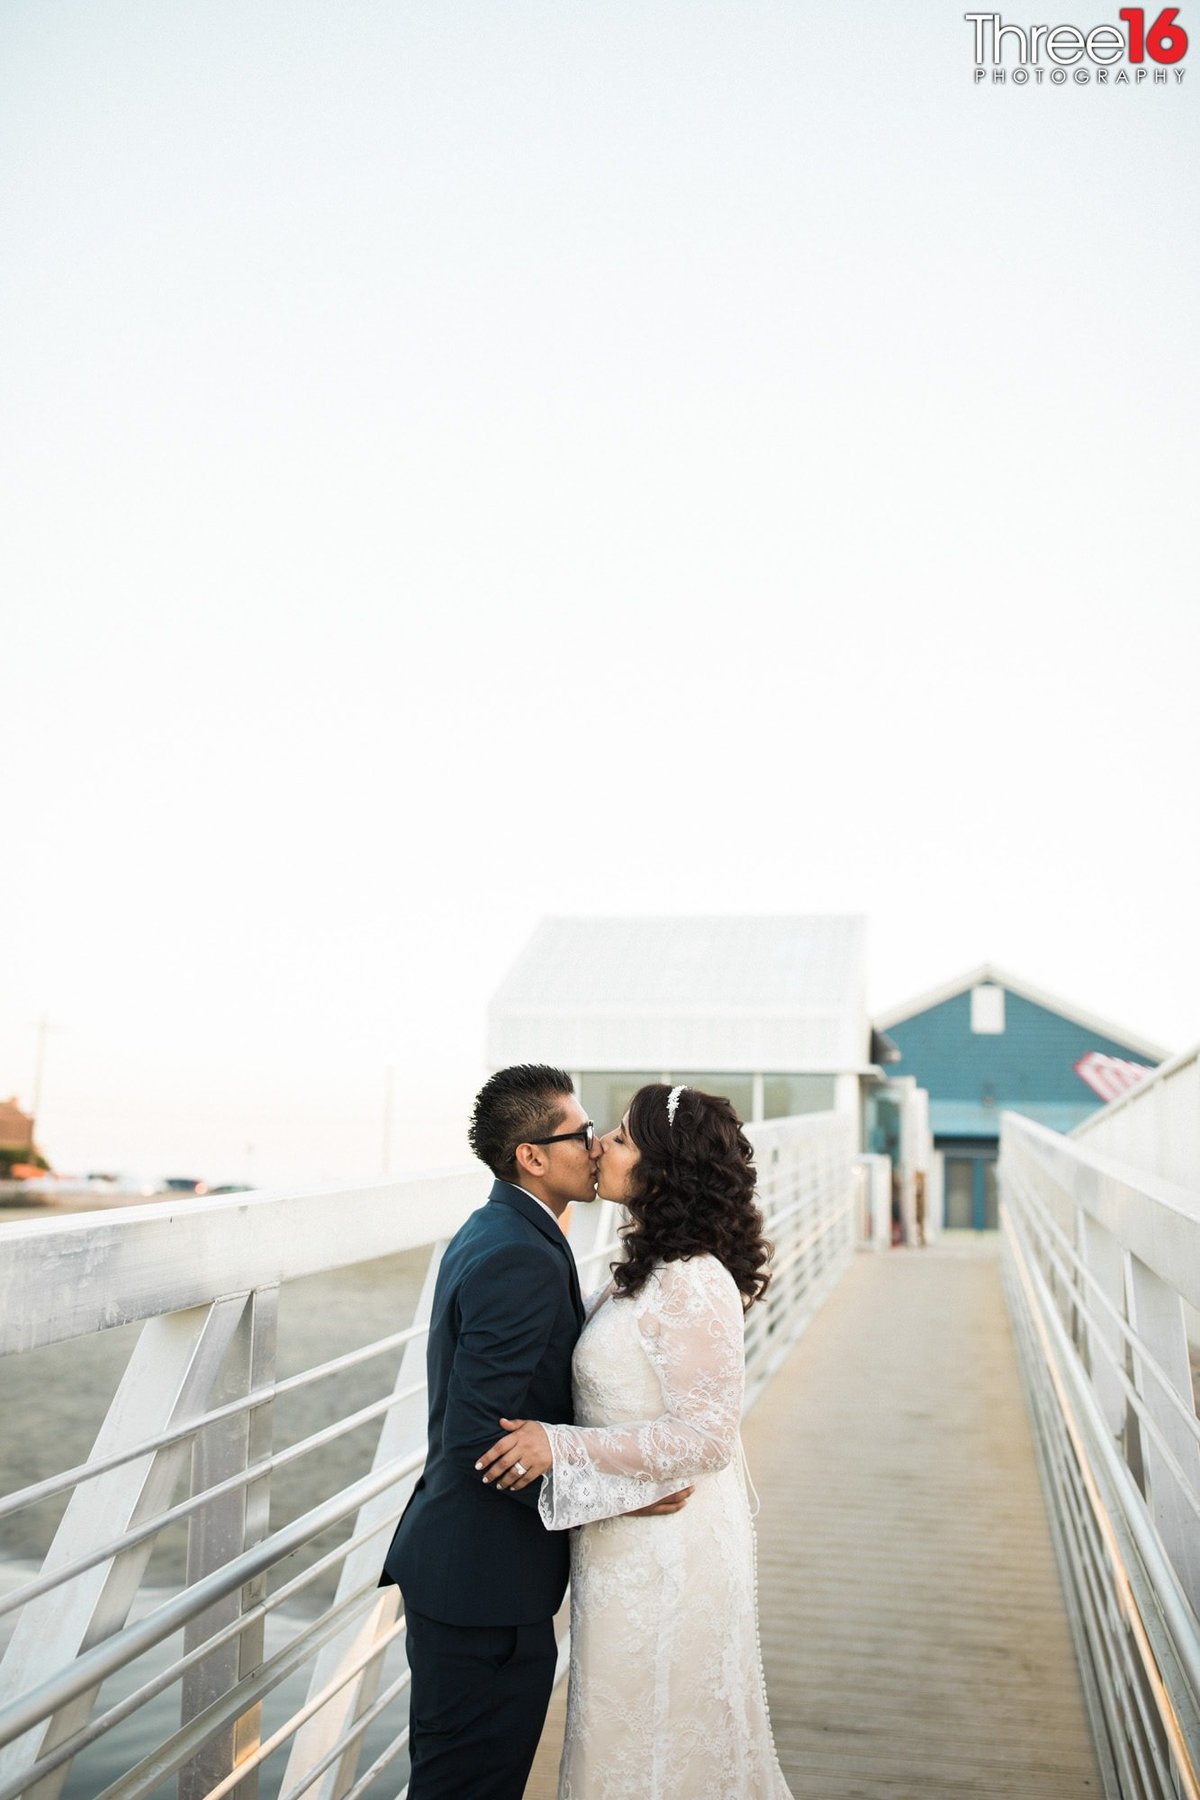 Newly married couple share a kiss on the dock in Long Beach